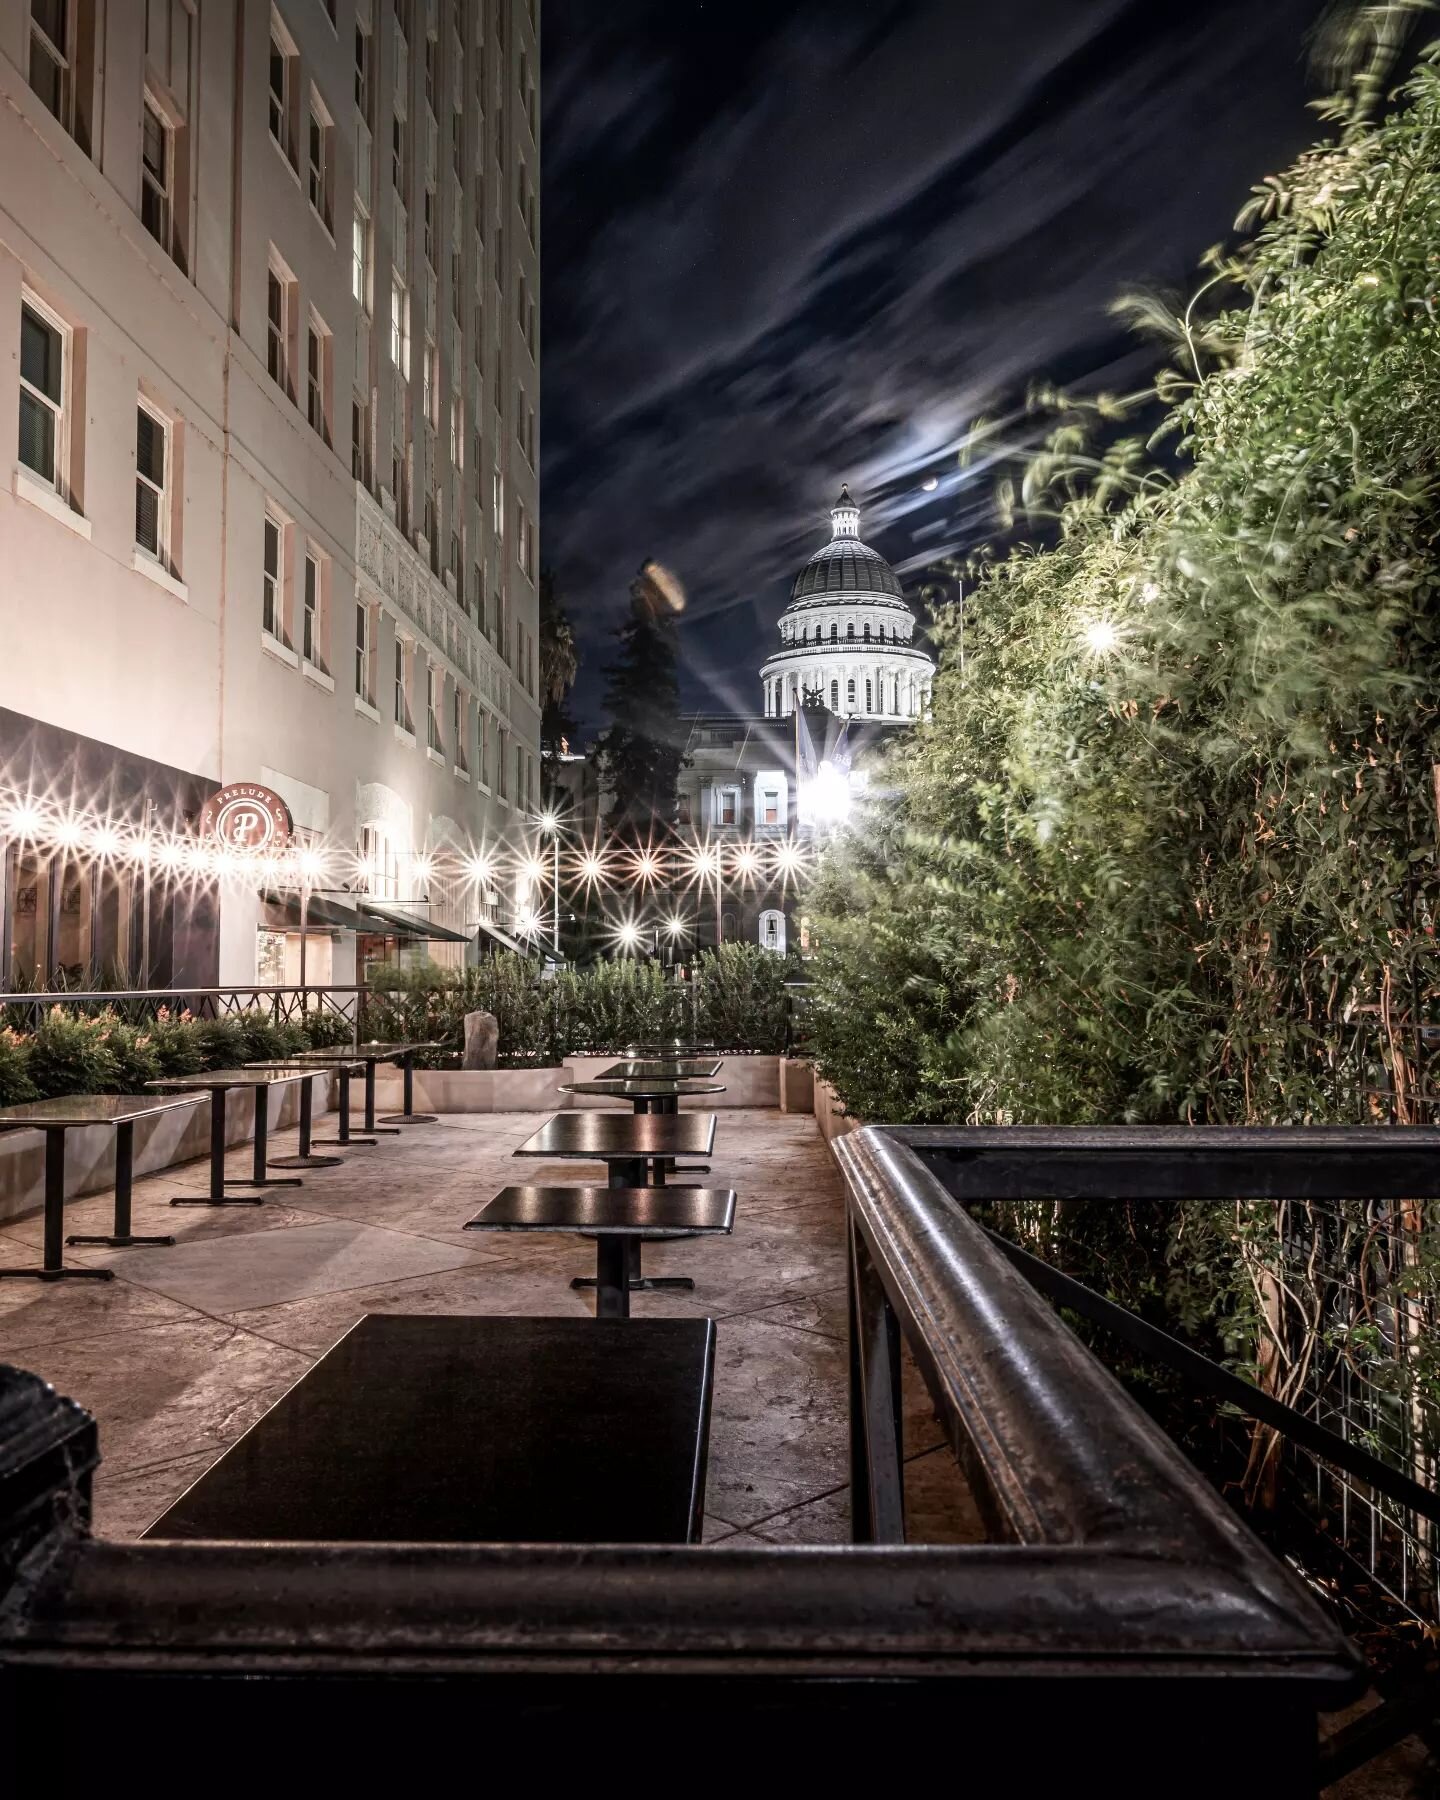 Catching some views on another late-night downtown walk.

📸: Z6 II + NIKKOR Z 24-70mm f/4 S from @nikonusa.

#ZCreators #NikonZ6II #NIKKORZ #NikonCreators #NikonNoFilter #NightPhotography #VisitSacramento